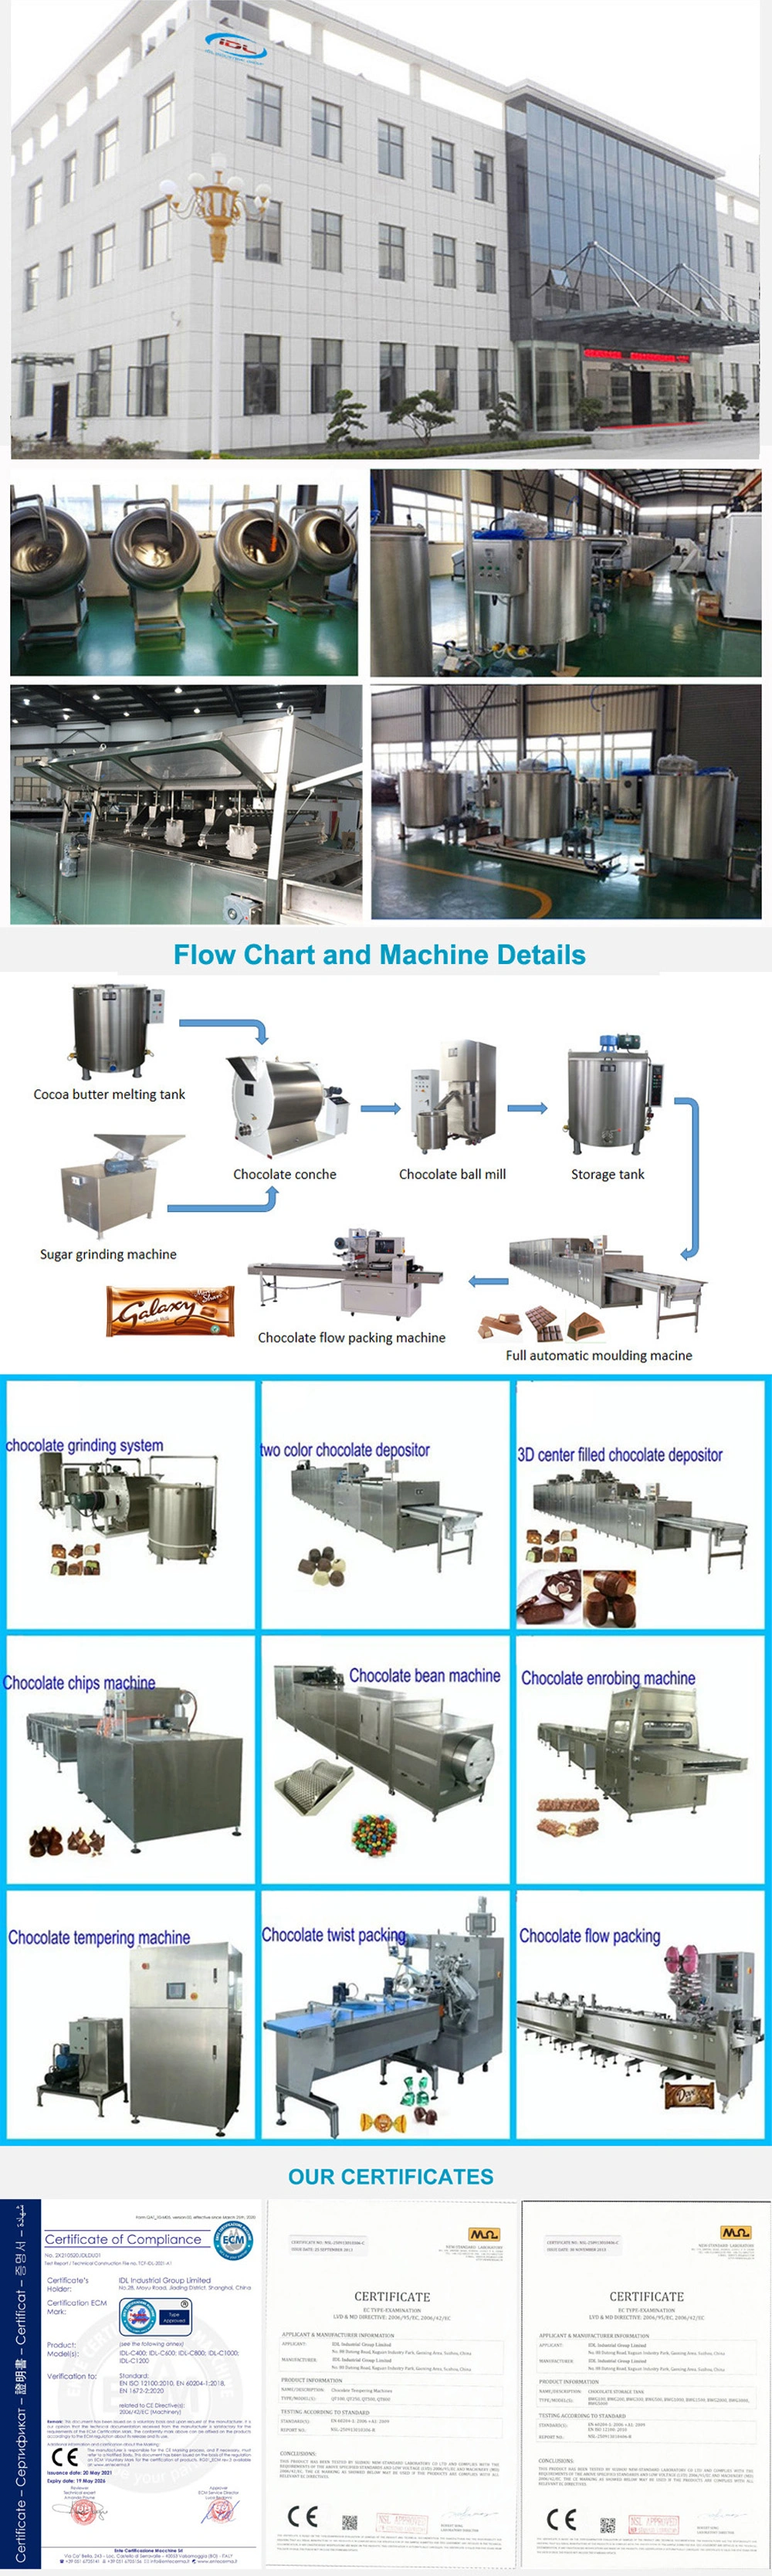 Chocolate Paste Refining, Chocolate Processing and Making Machine with Nuts Feeder